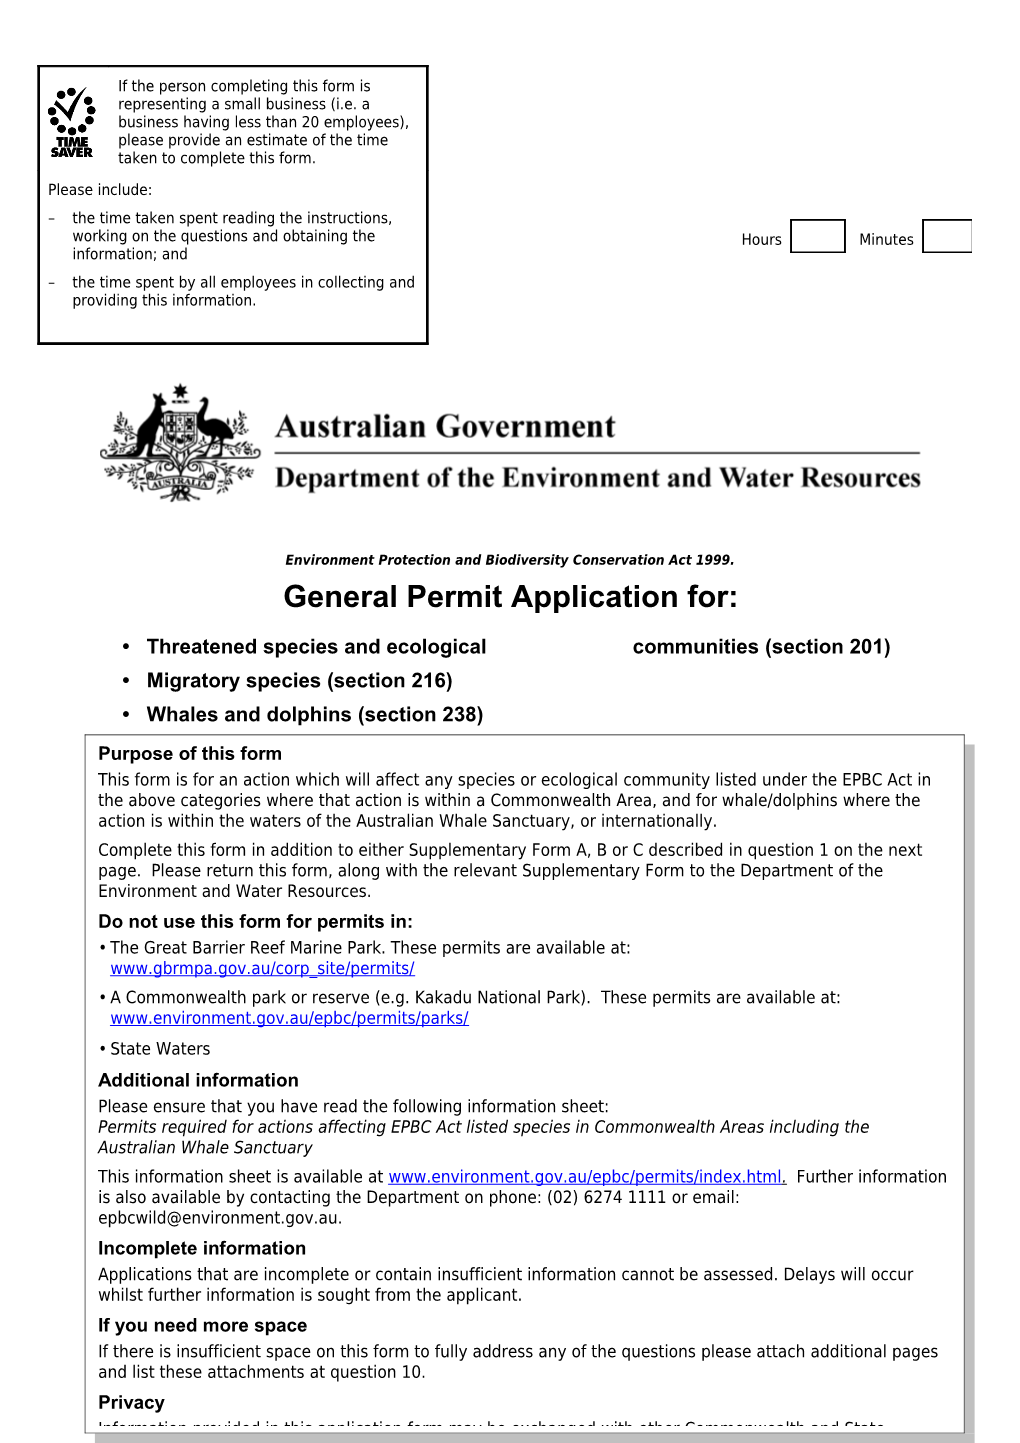 General Permit Application - Application for Permit to Undertake Research to Better Understand